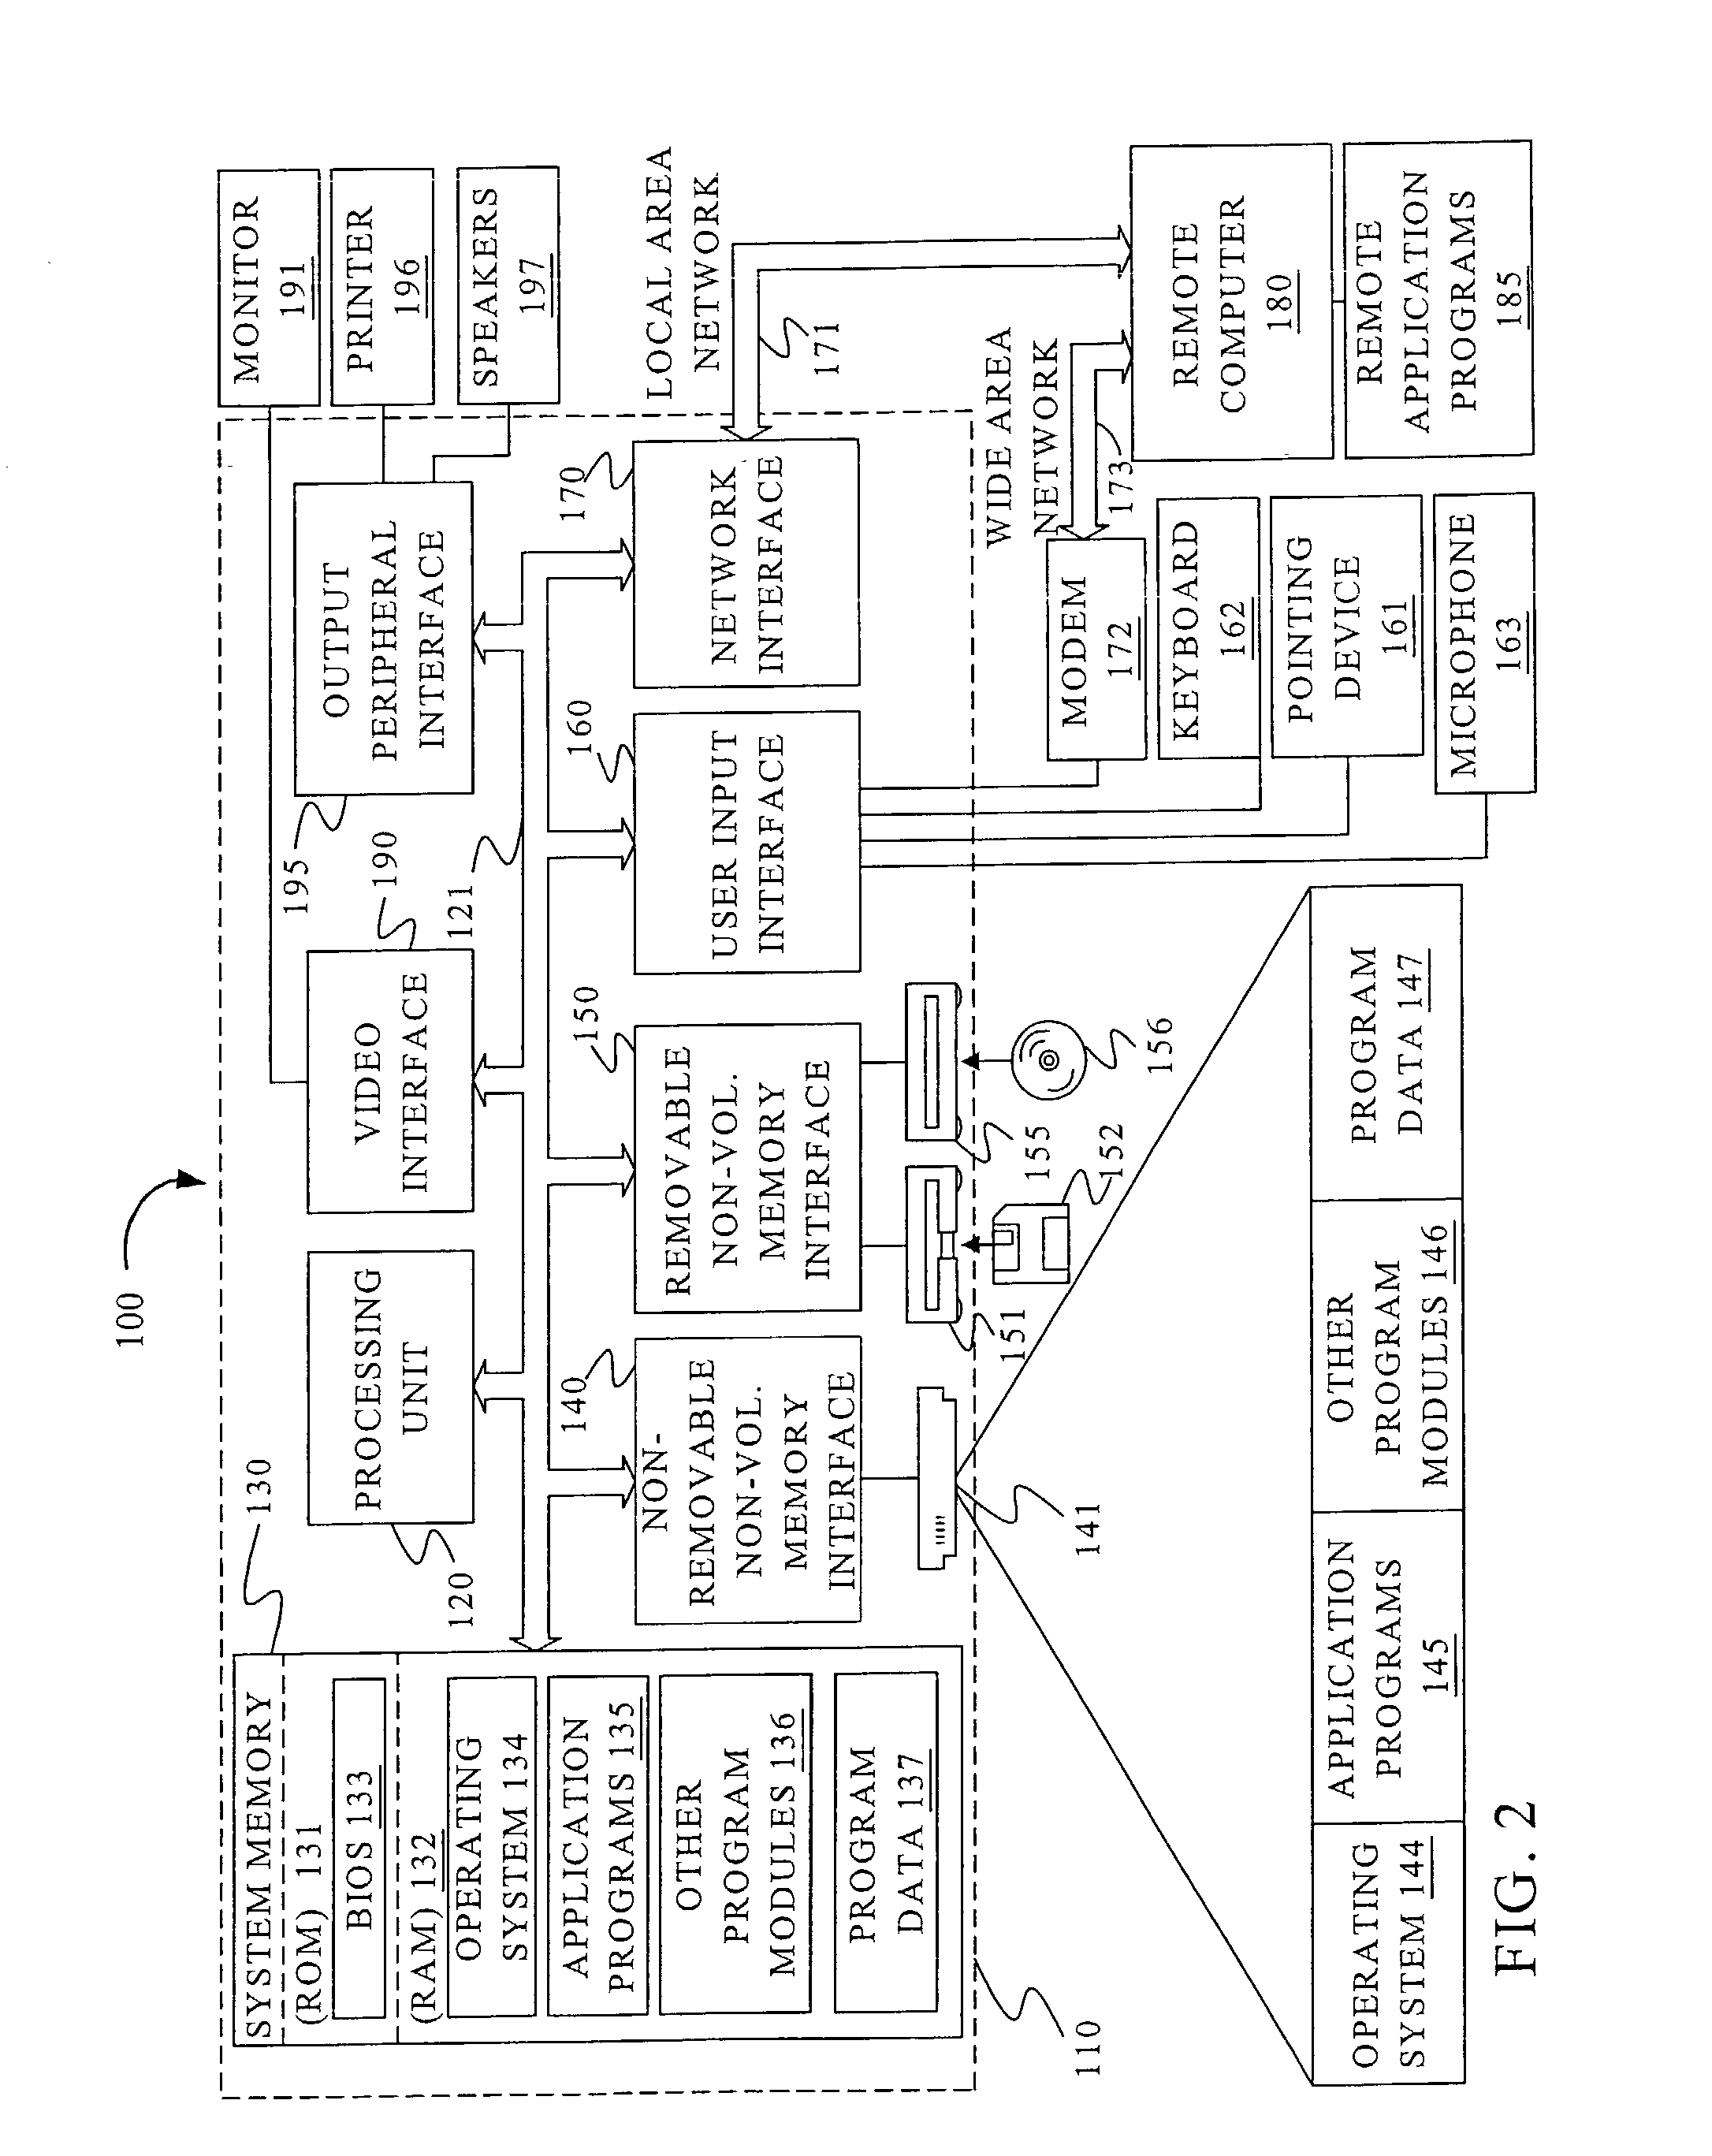 Method for specifying and parsing expressions